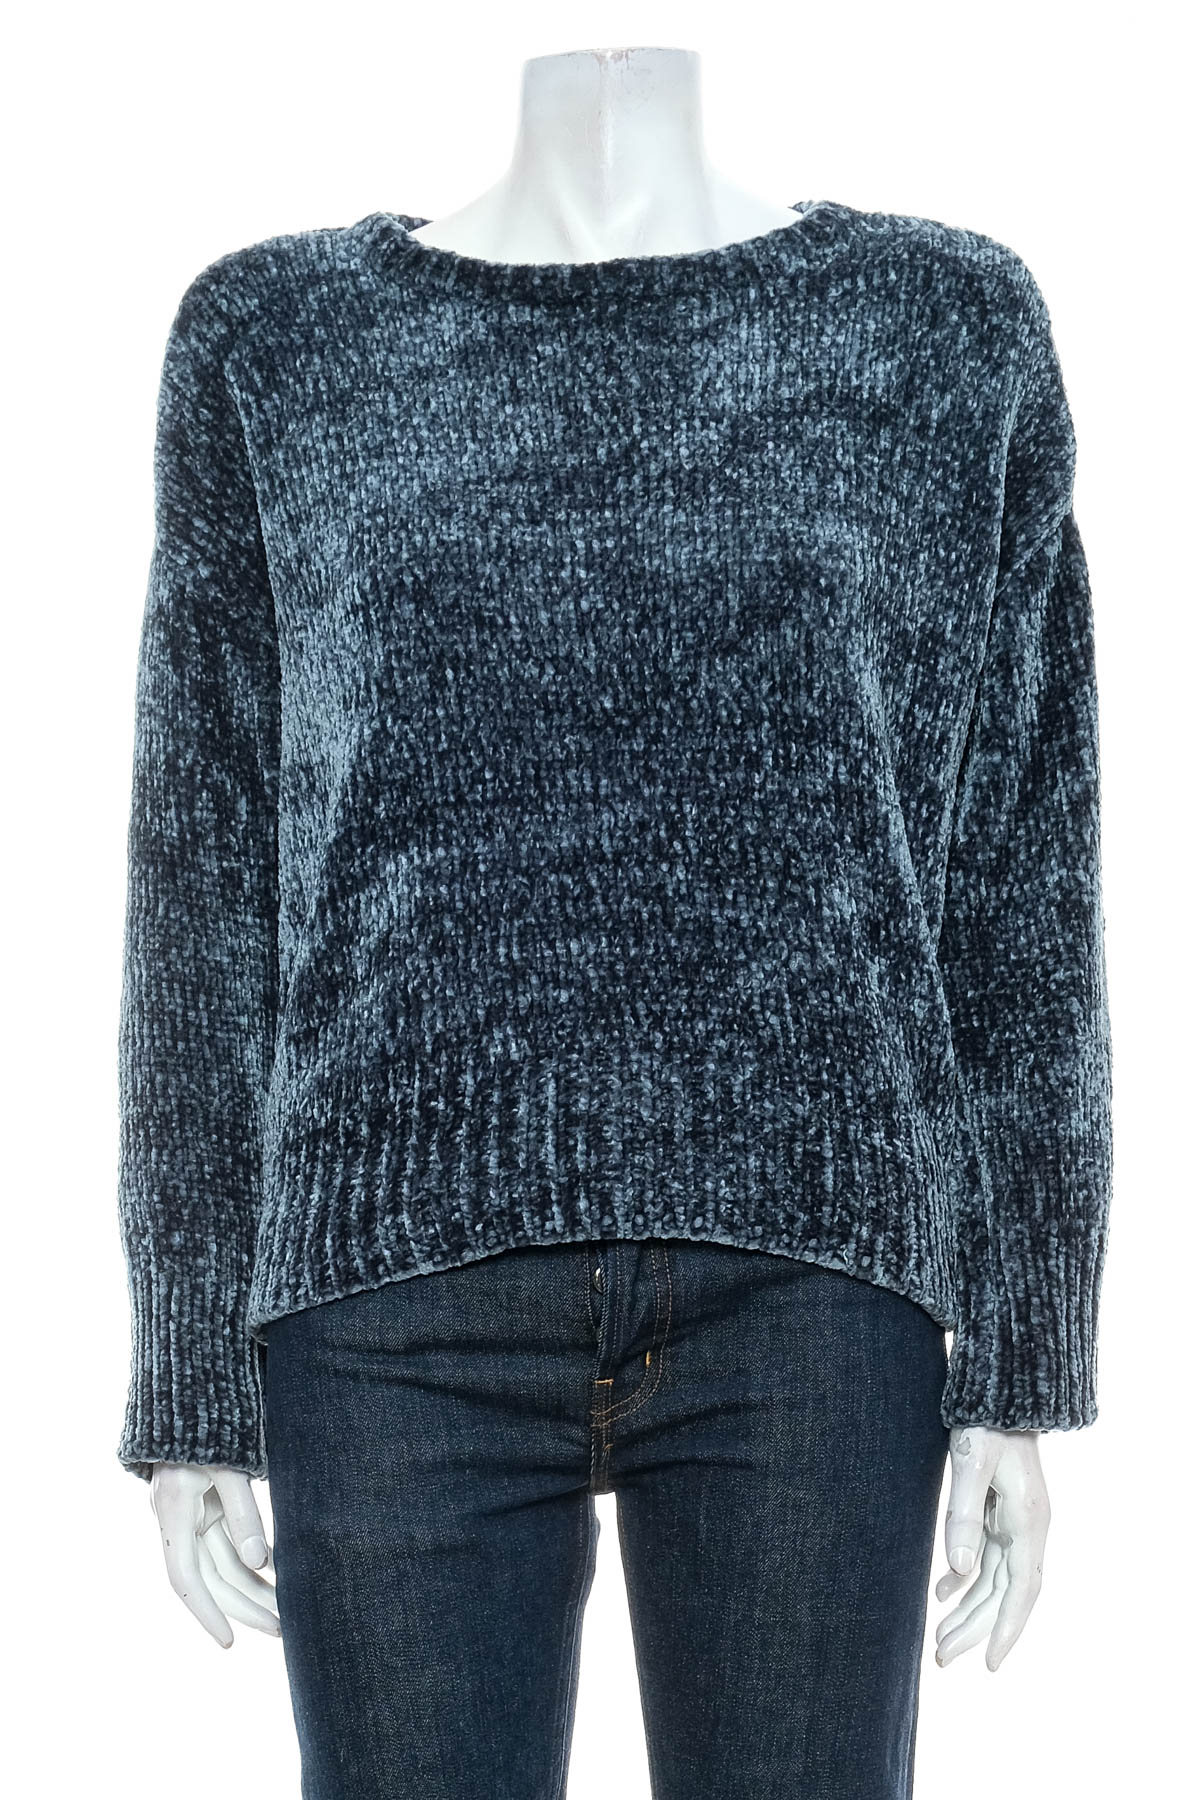 Women's sweater - Clothing & CO - 0